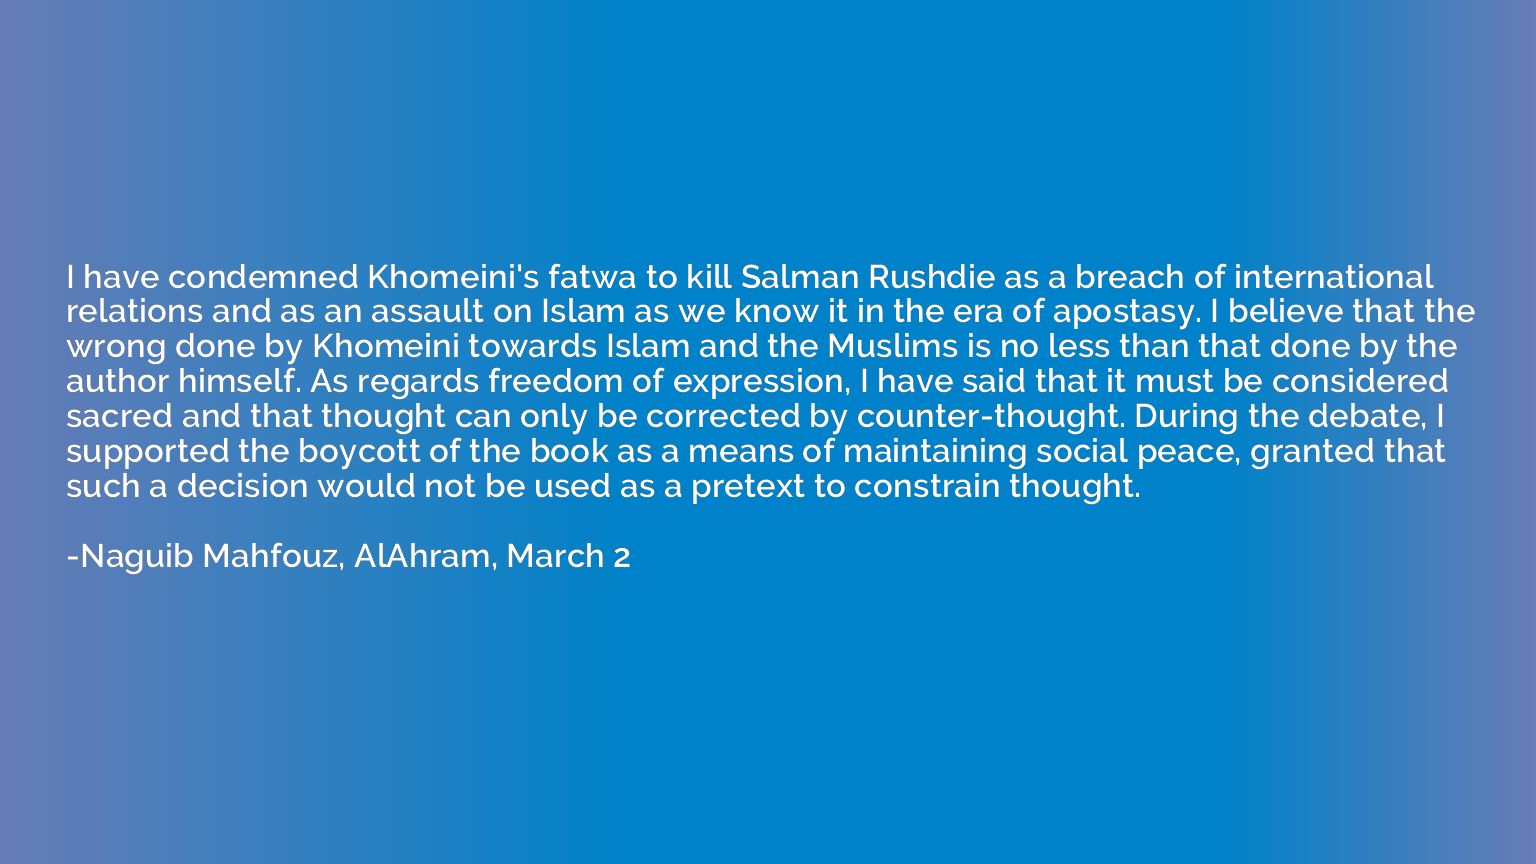 I have condemned Khomeini's fatwa to kill Salman Rushdie as 